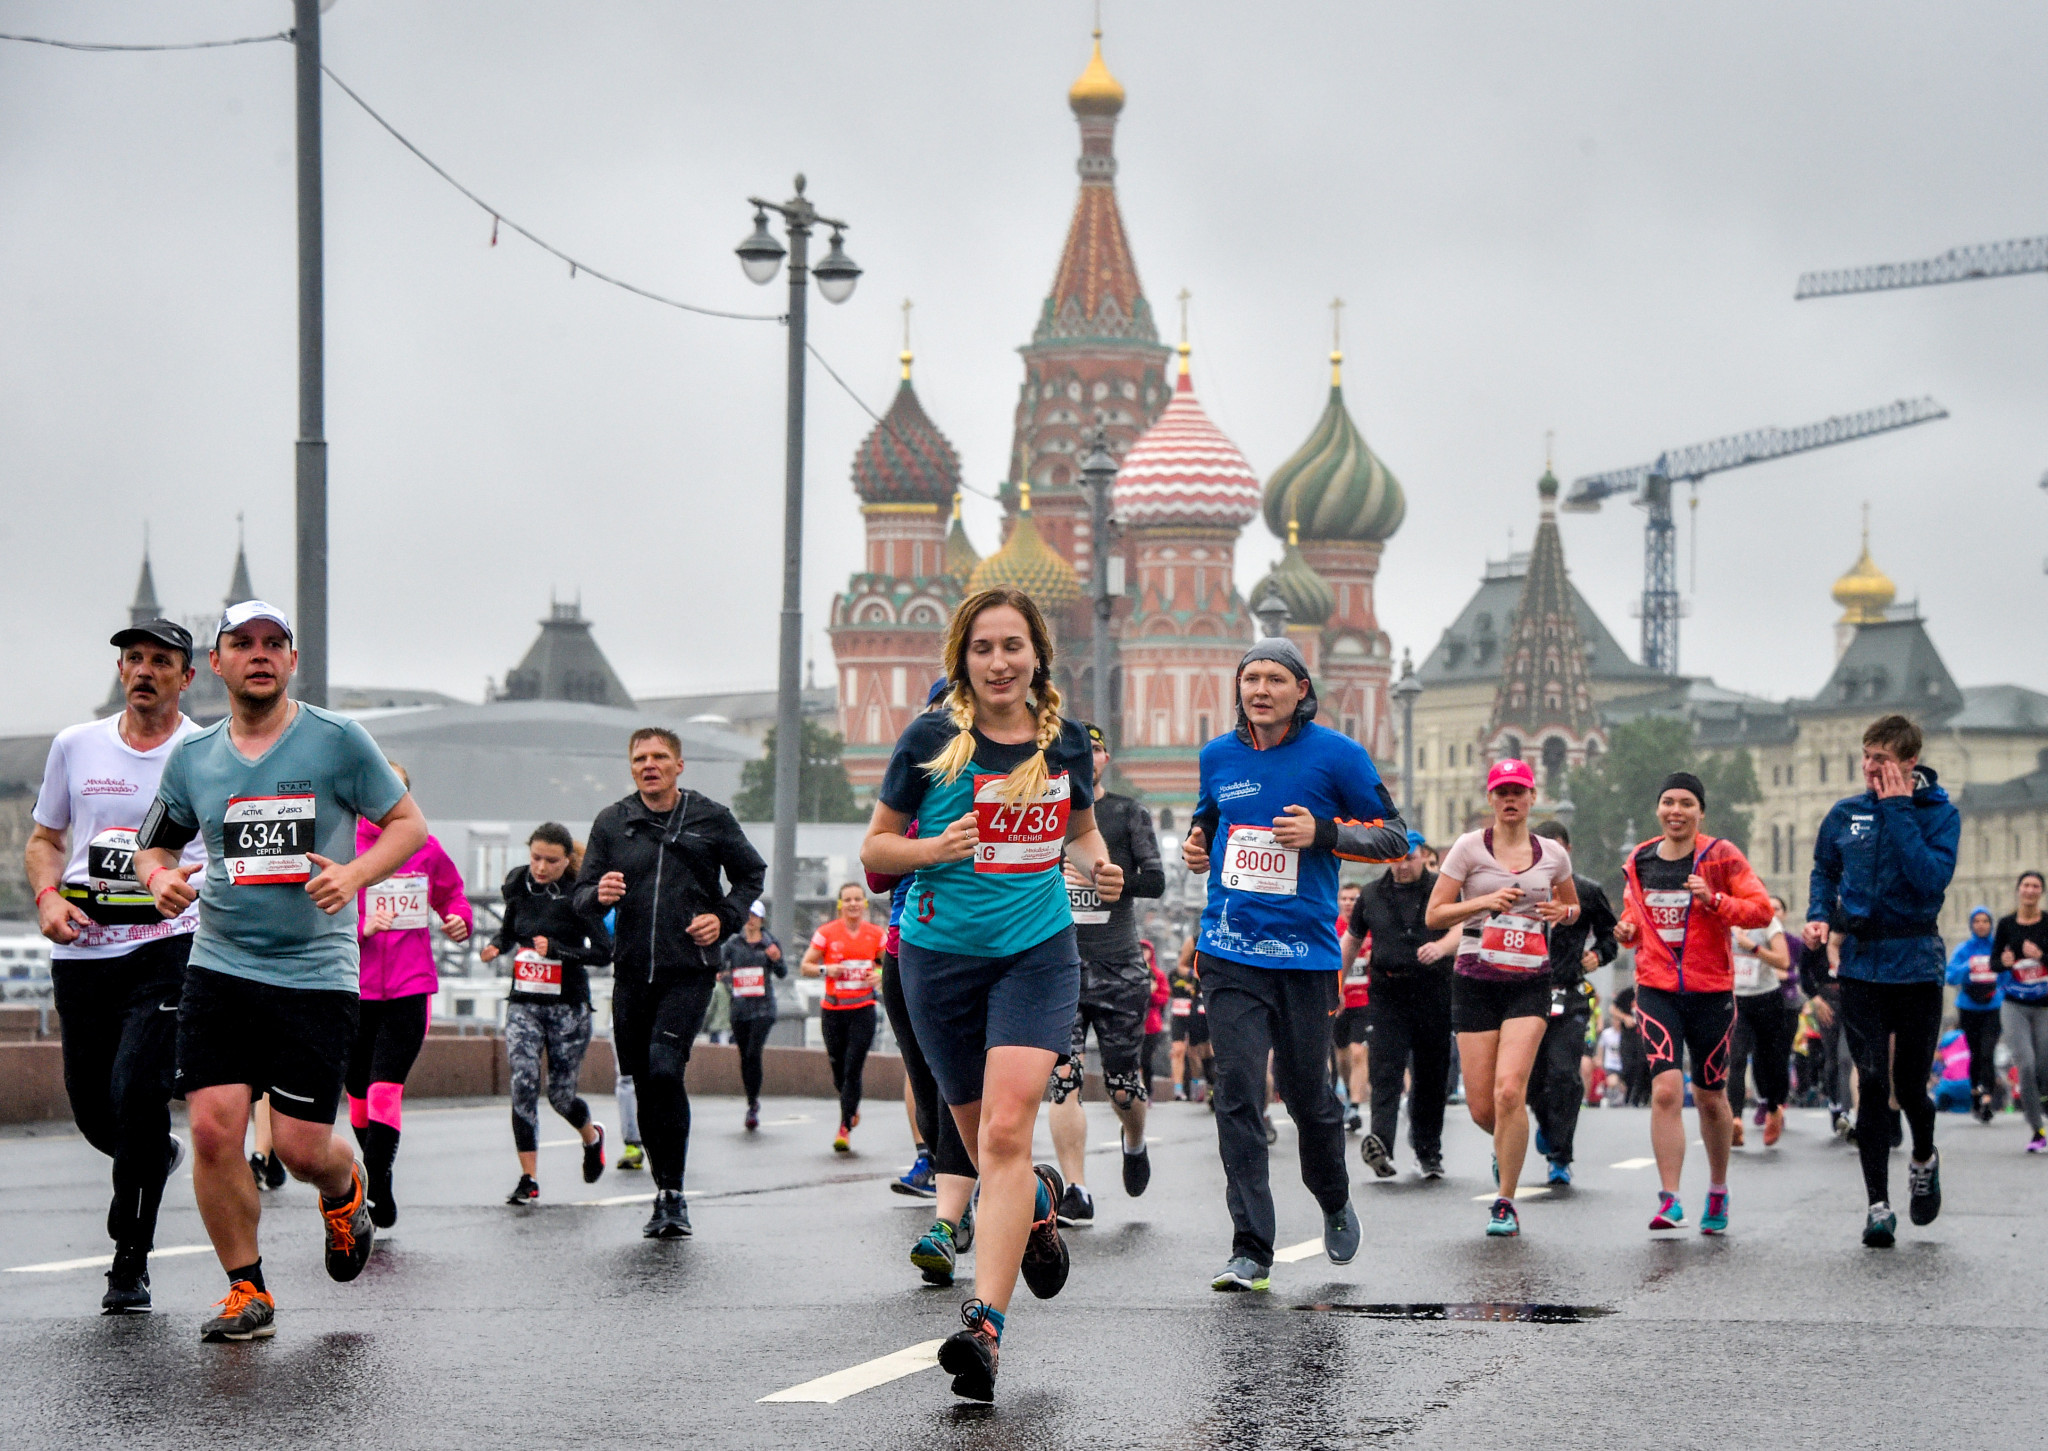 Organisers of the Moscow Marathon have criticised the Boston Marathon for its ban on Russian and Belarusian athletes ©Getty Images